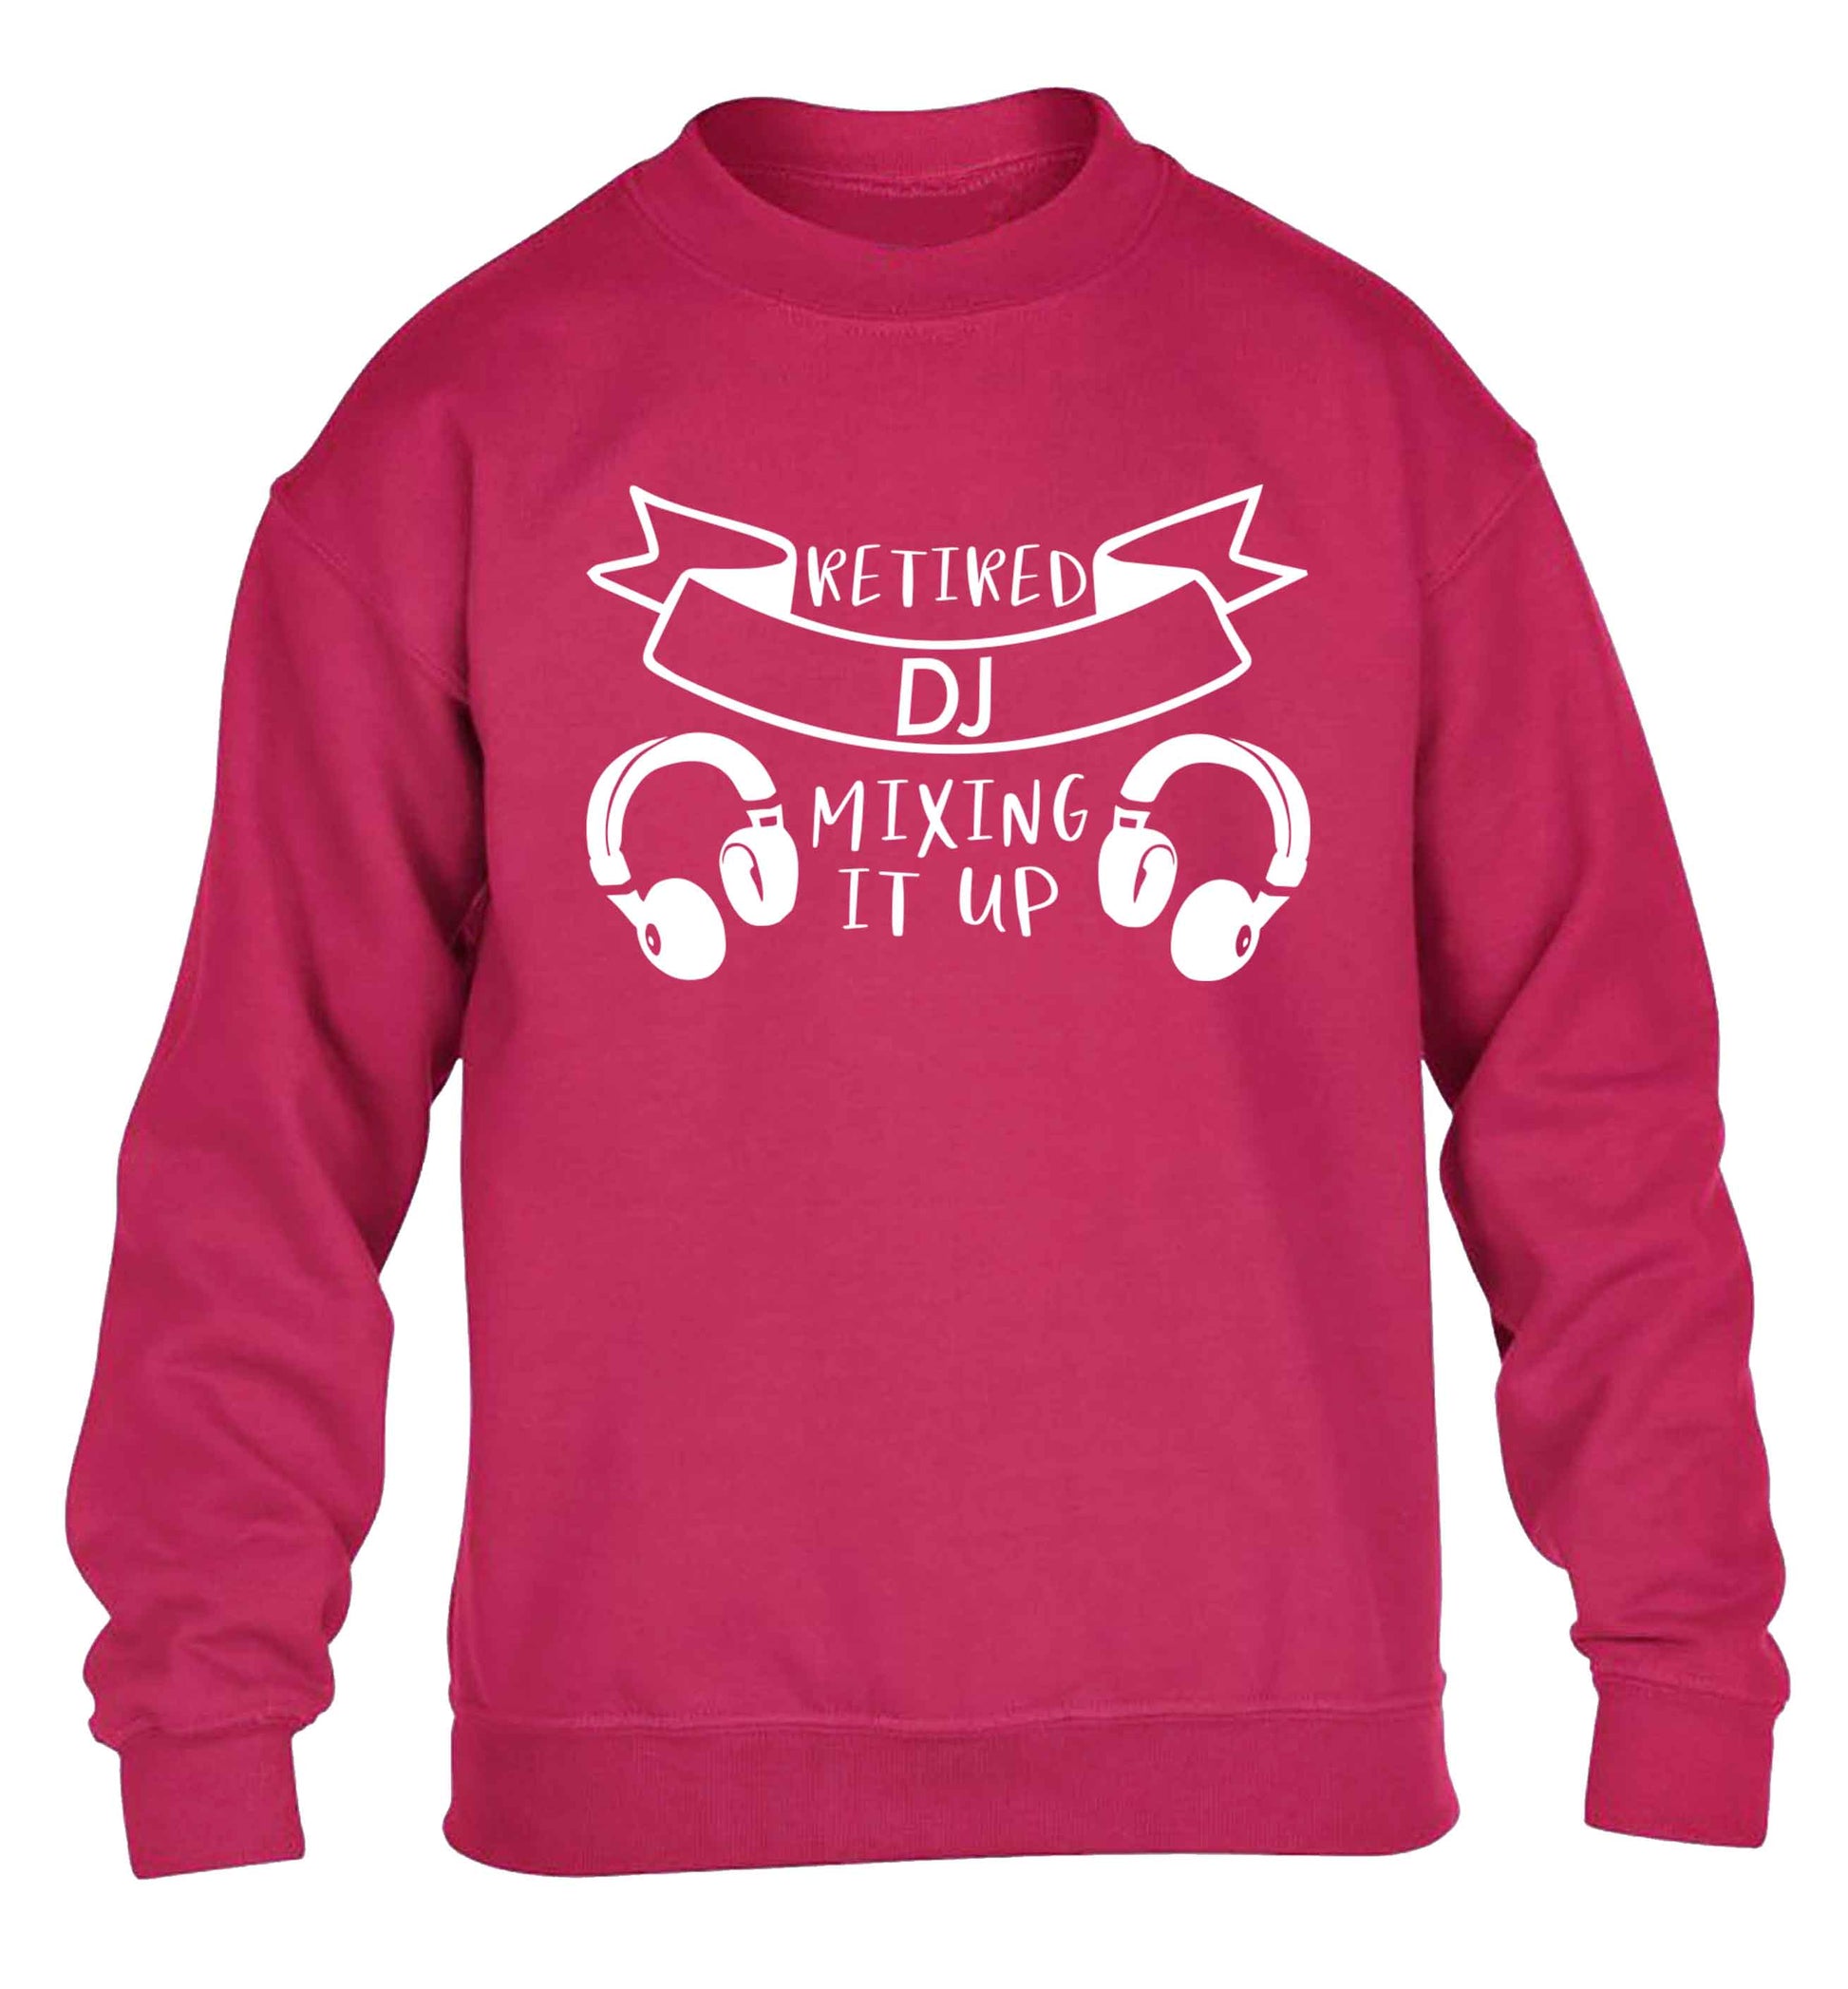 Retired DJ mixing it up children's pink sweater 12-13 Years